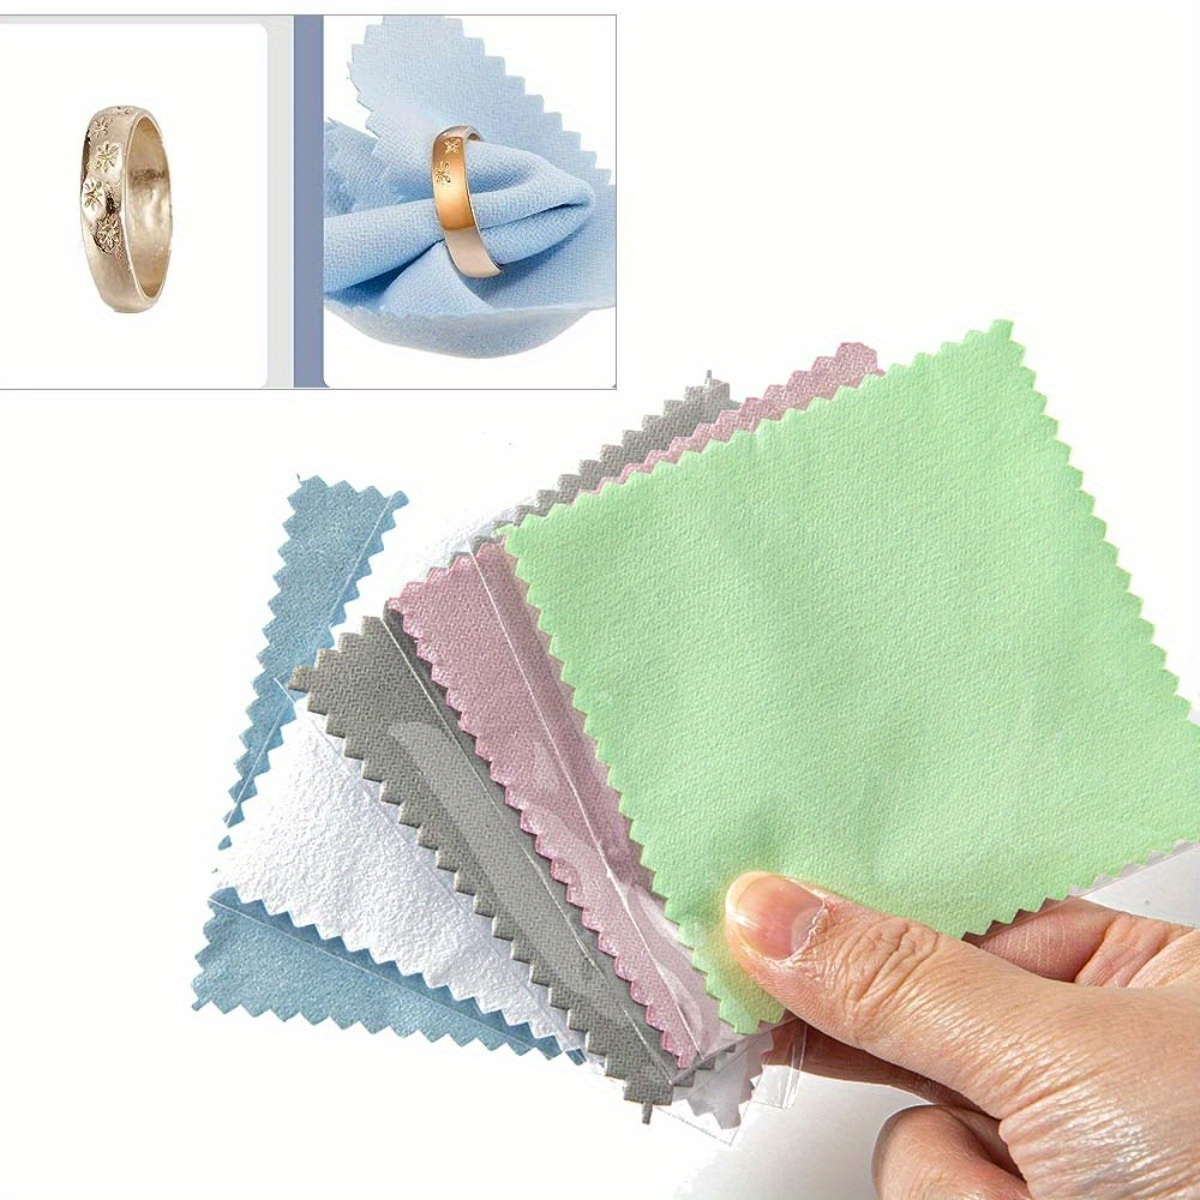 2 Packs Pro Size Jewelry Cleaning Cloth & Silver Polishing Cloth